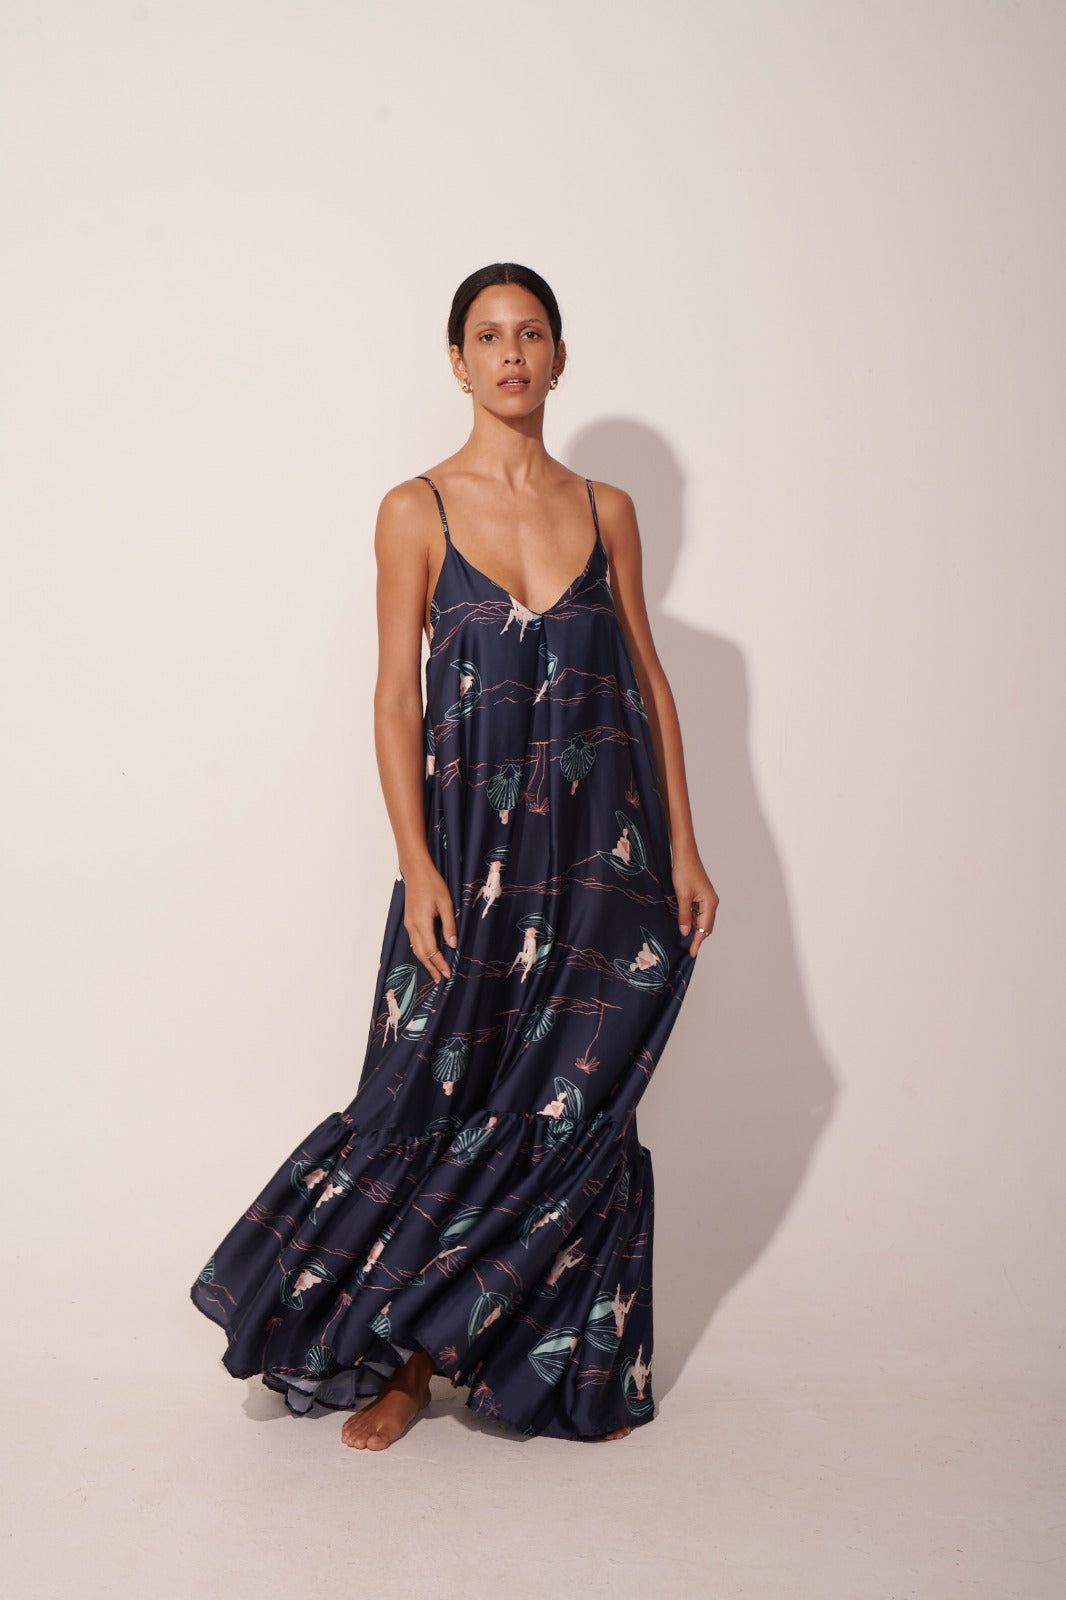 The Staycation Blue Maxi Dress